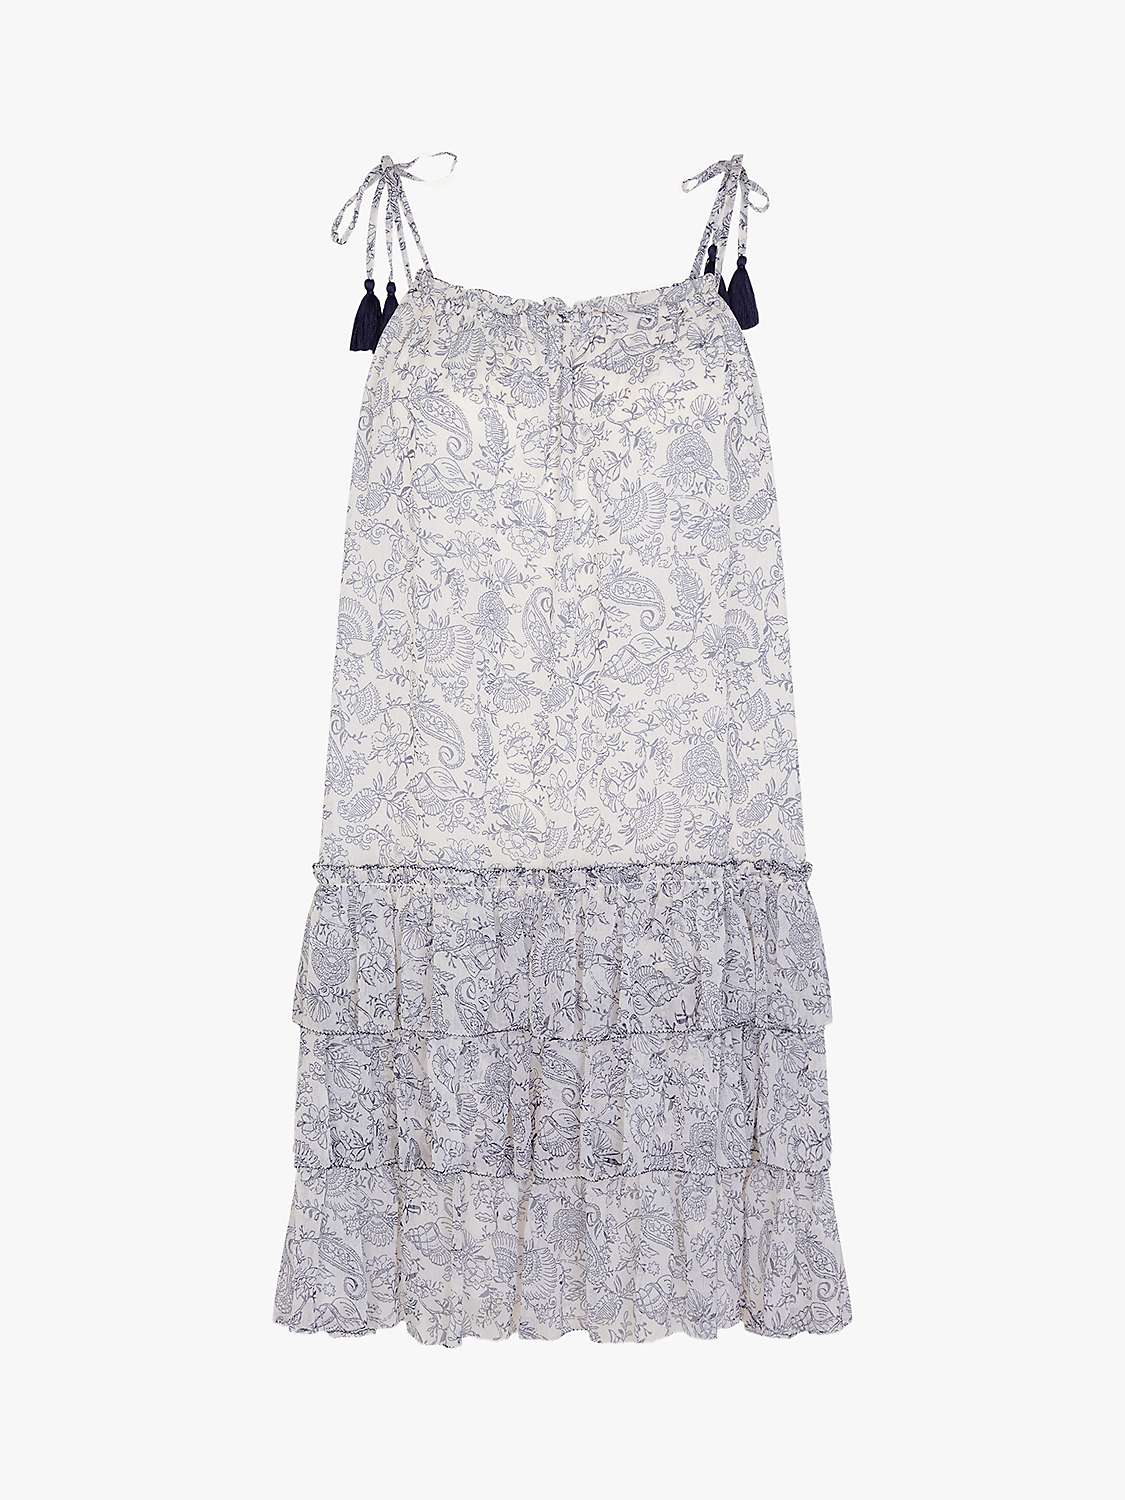 Buy Accessorize Strappy Tiered Mini Dress, White/Multi Online at johnlewis.com